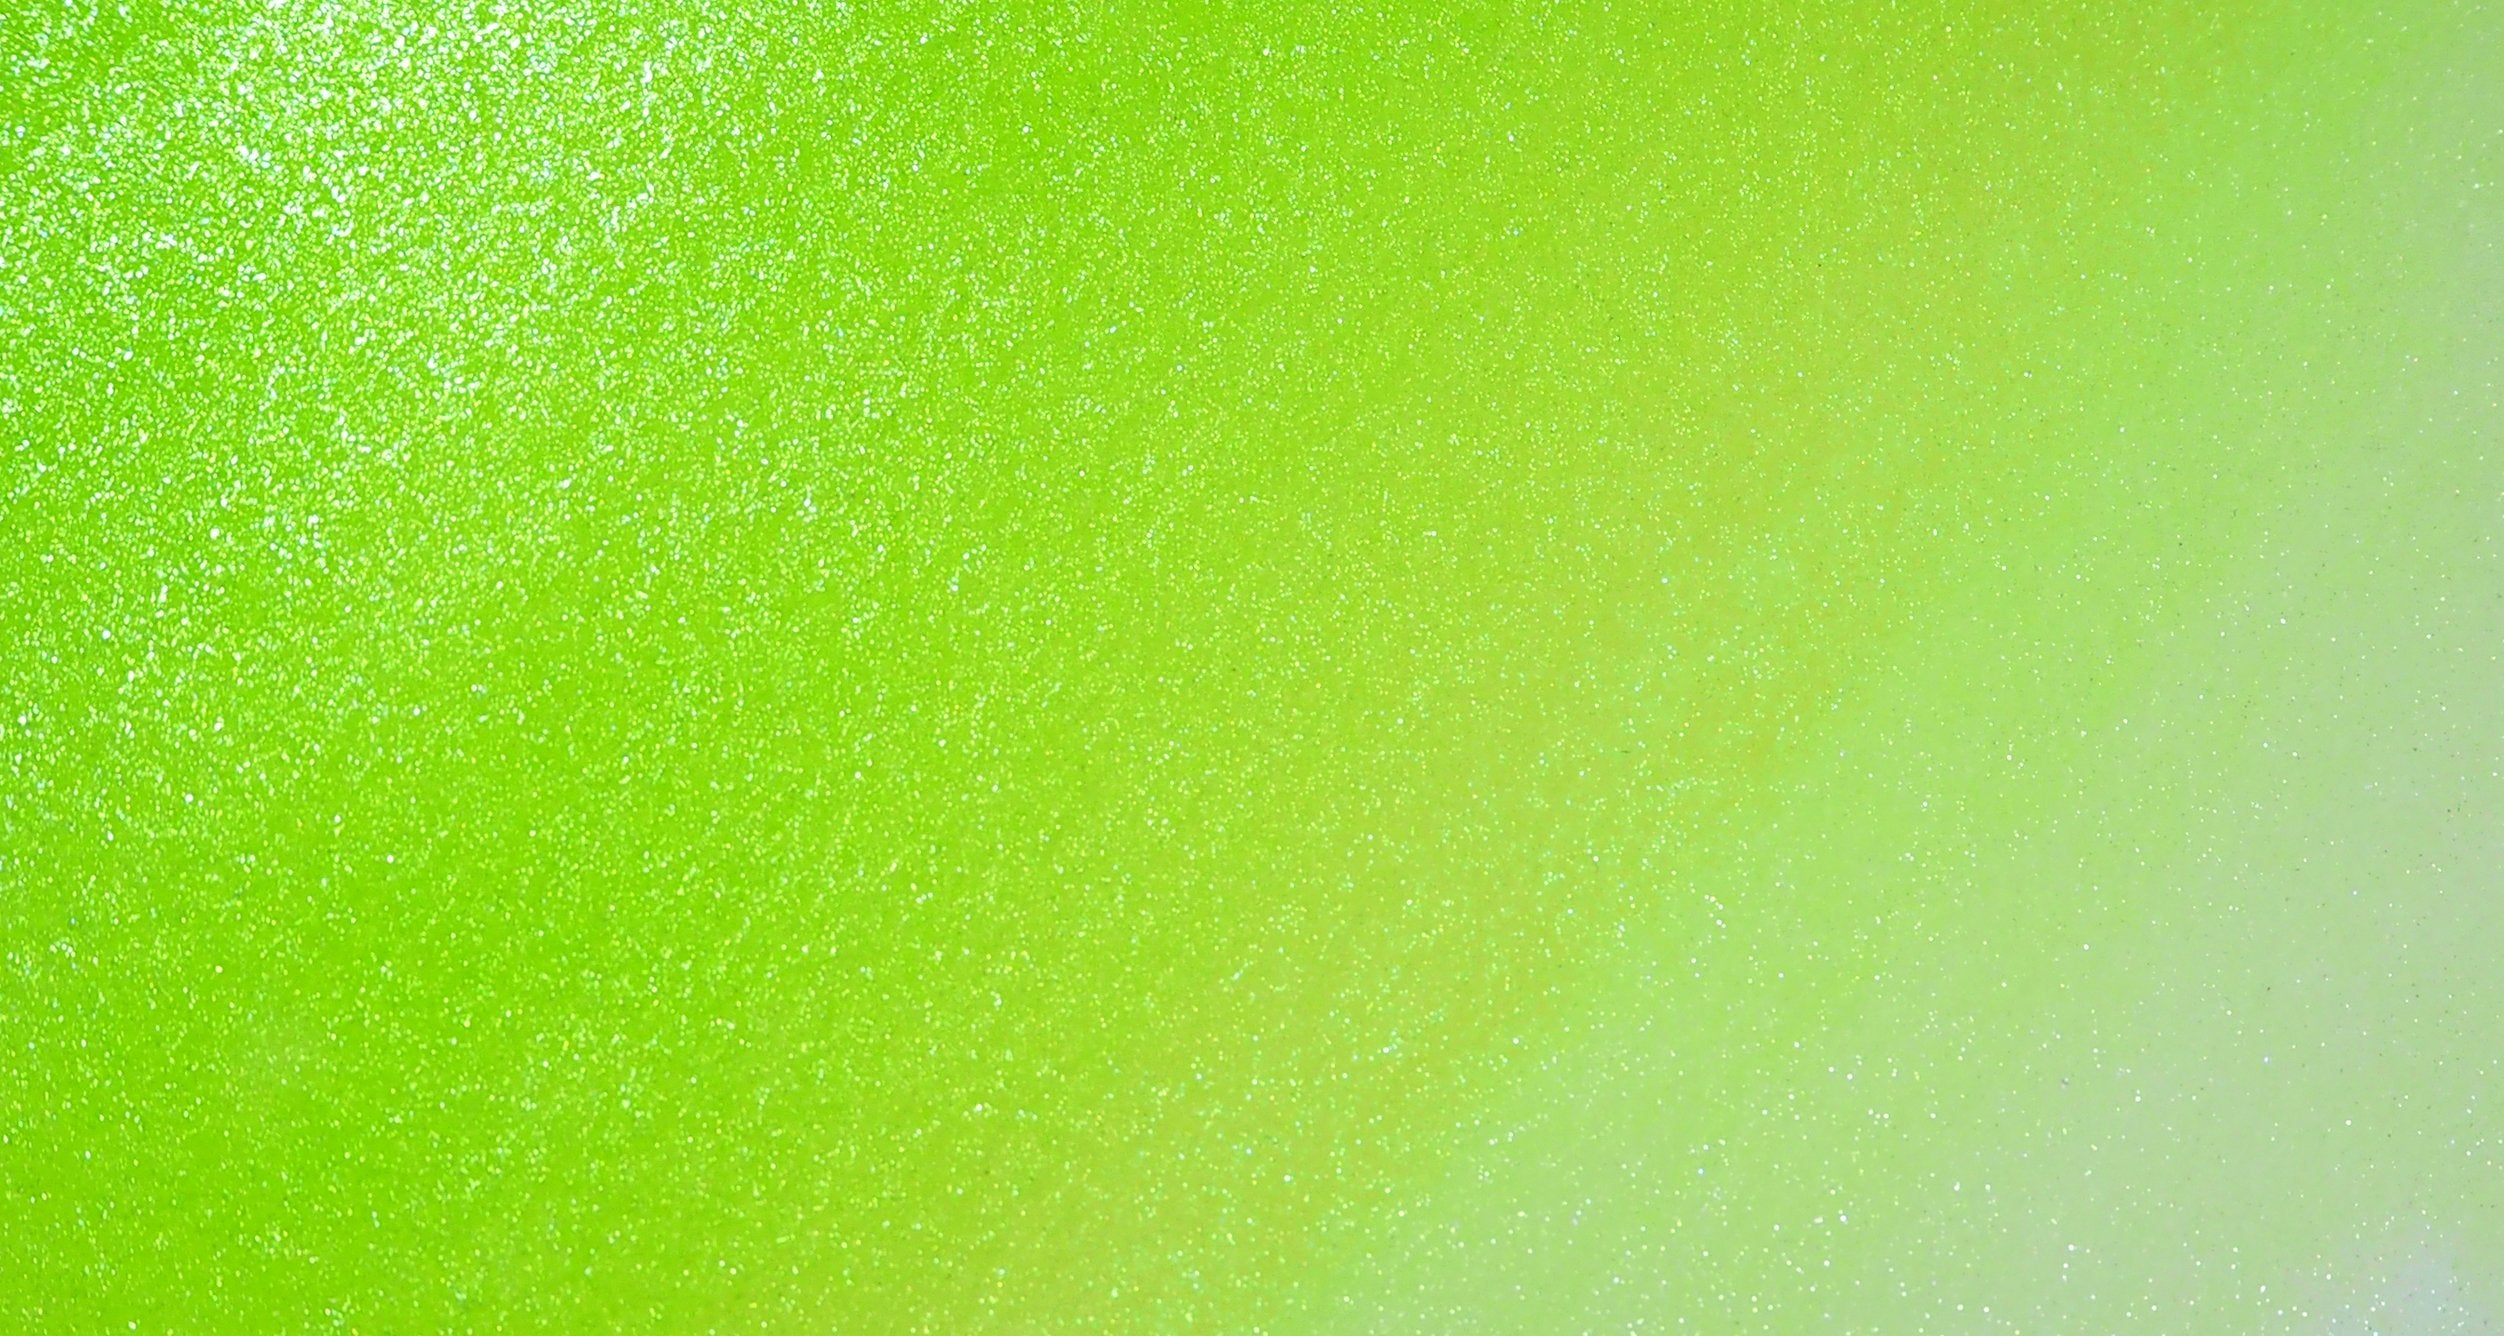 #colour_pearlescent lime sherbet